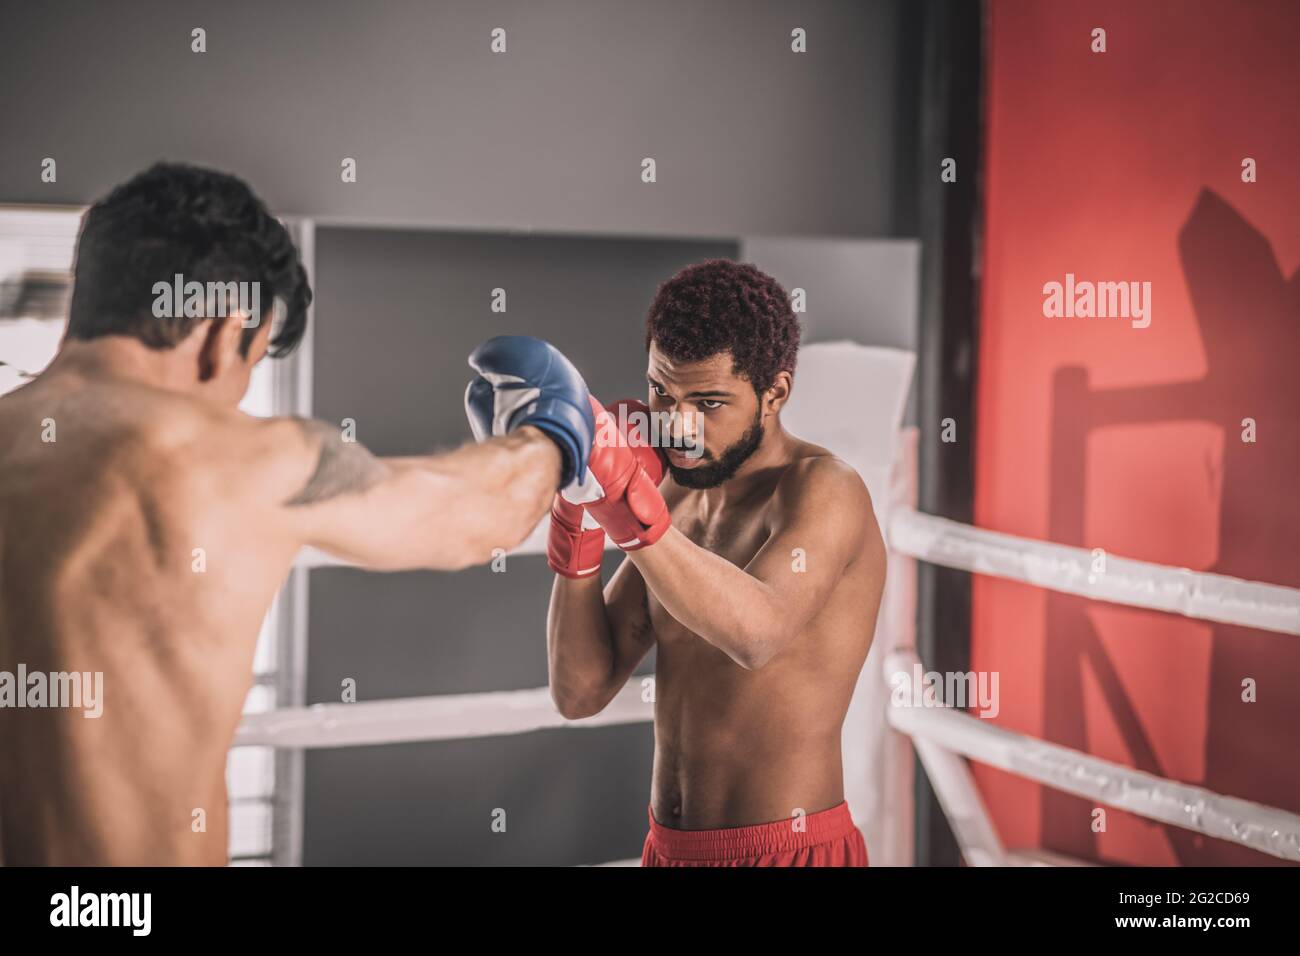 Two young kickboxers having a workout and looking involved Stock Photo